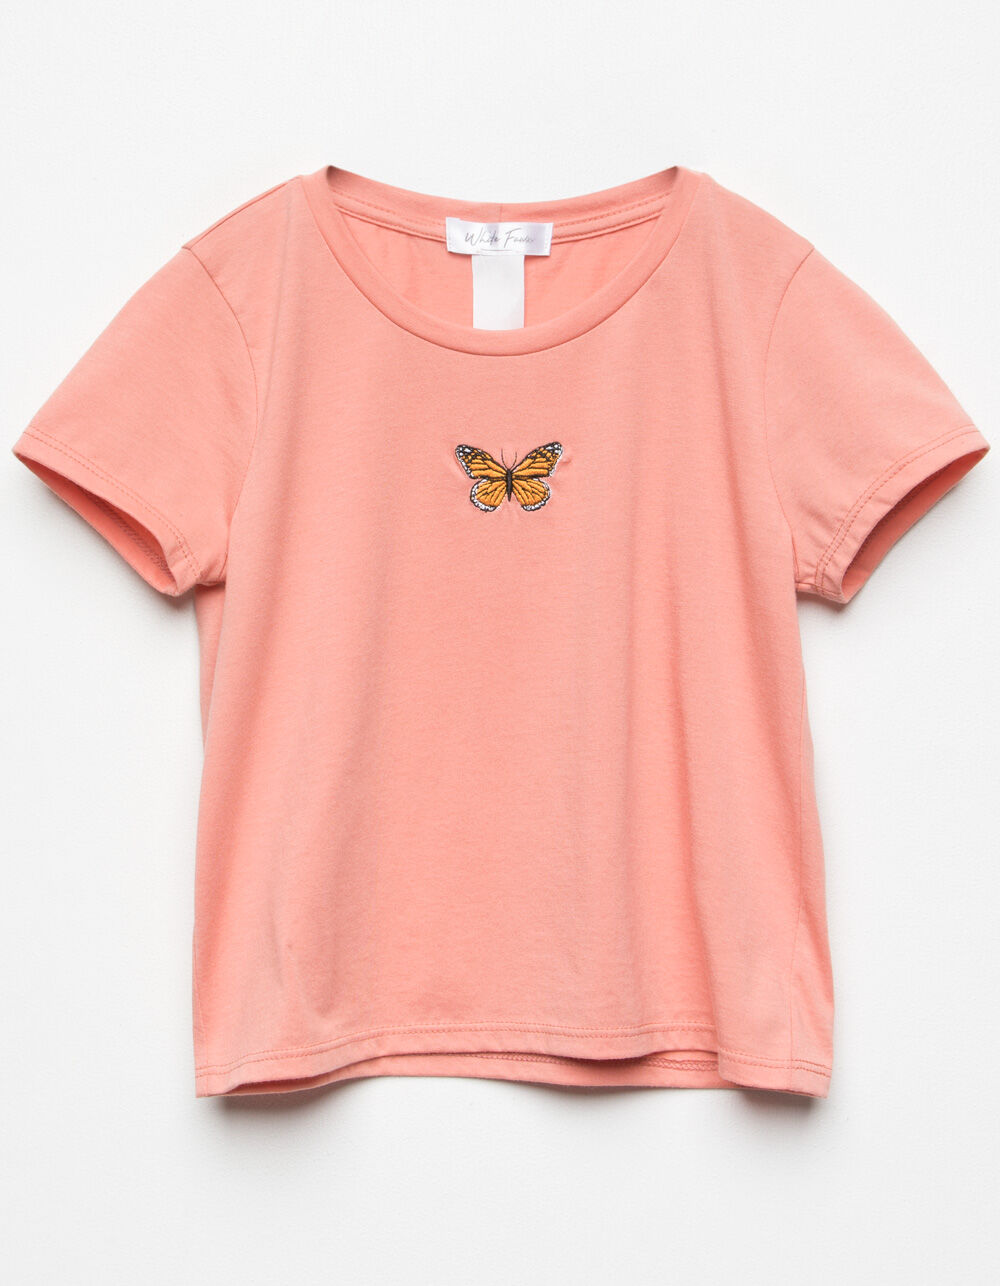 WHITE FAWN Embroidered Butterfly Girls Tee - PEACH | Tillys